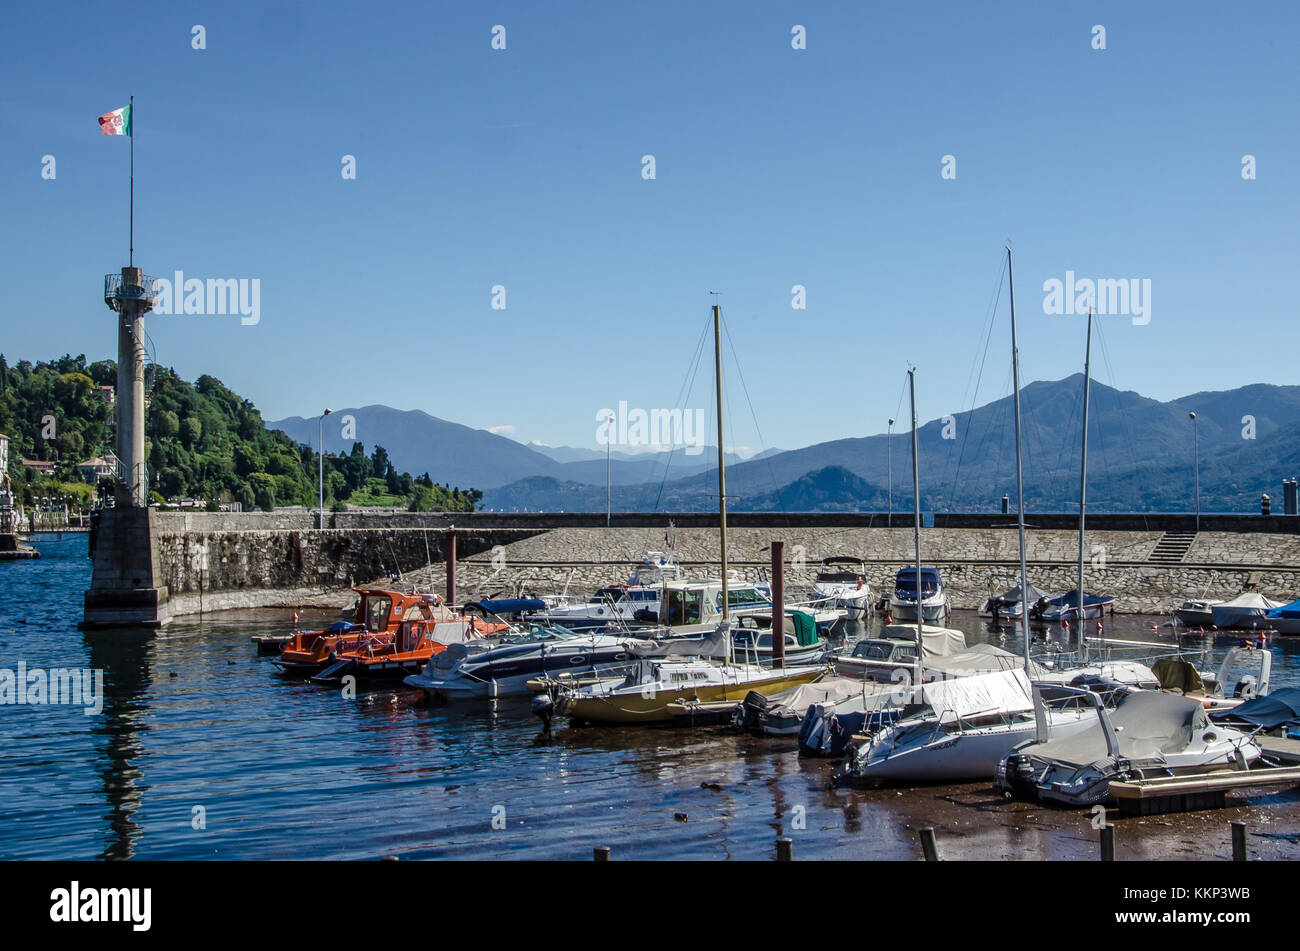 One of the best ways to see Lake Maggiore and visit its towns is by boat. It gives a unique  view of the scenery from the water rather than the road. Stock Photo